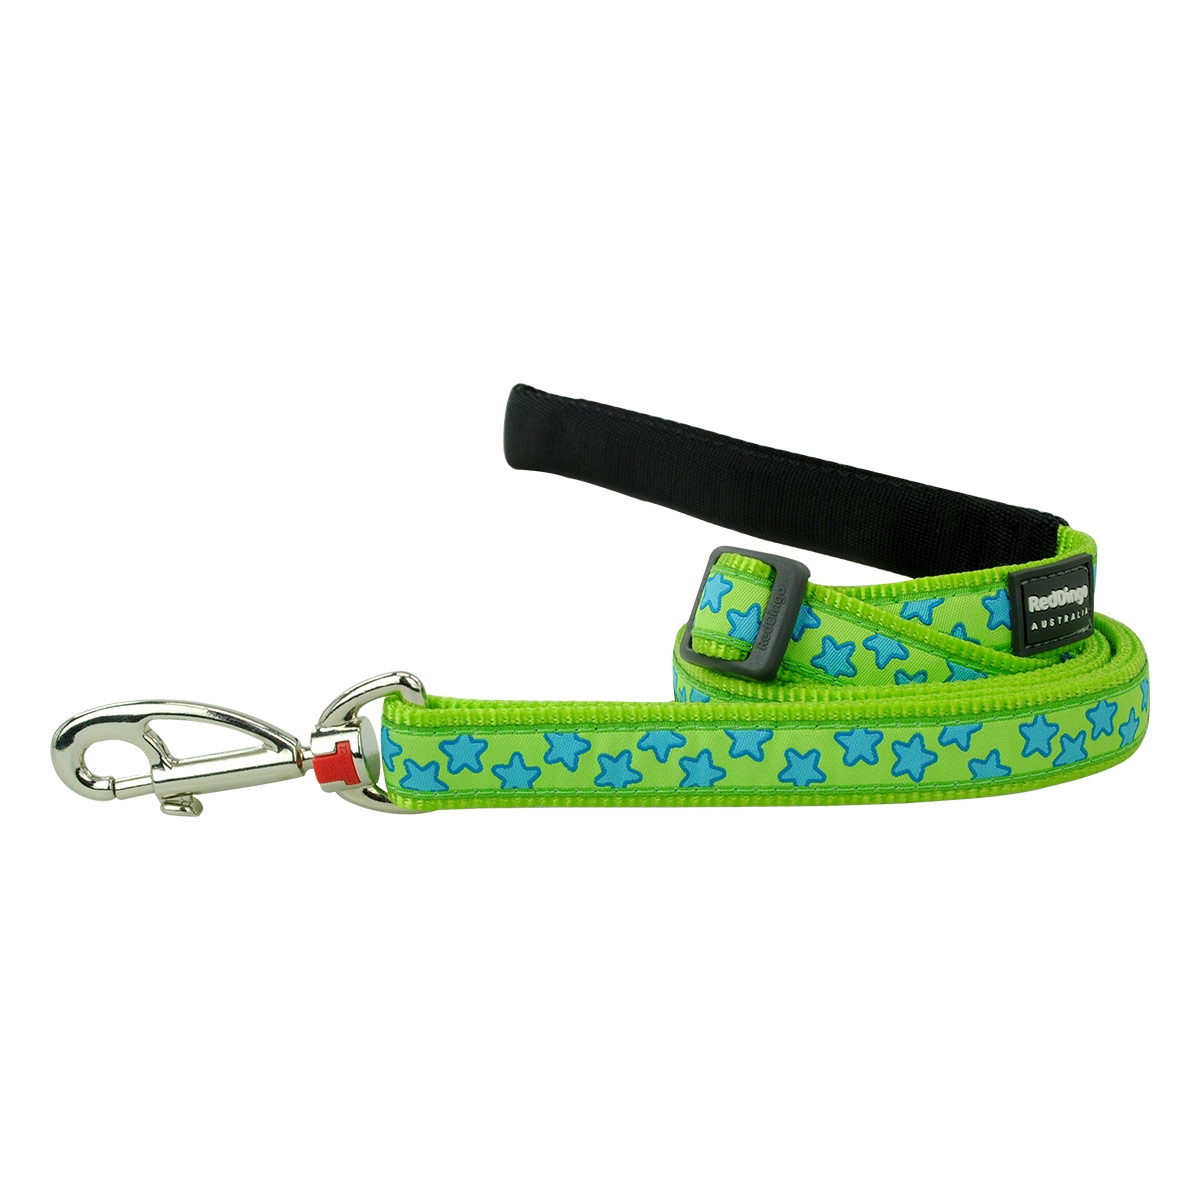 Picture of Red Dingo L6-ST-LG-12 Dog Lead Design Star Lime Green - Extra Small 6ft